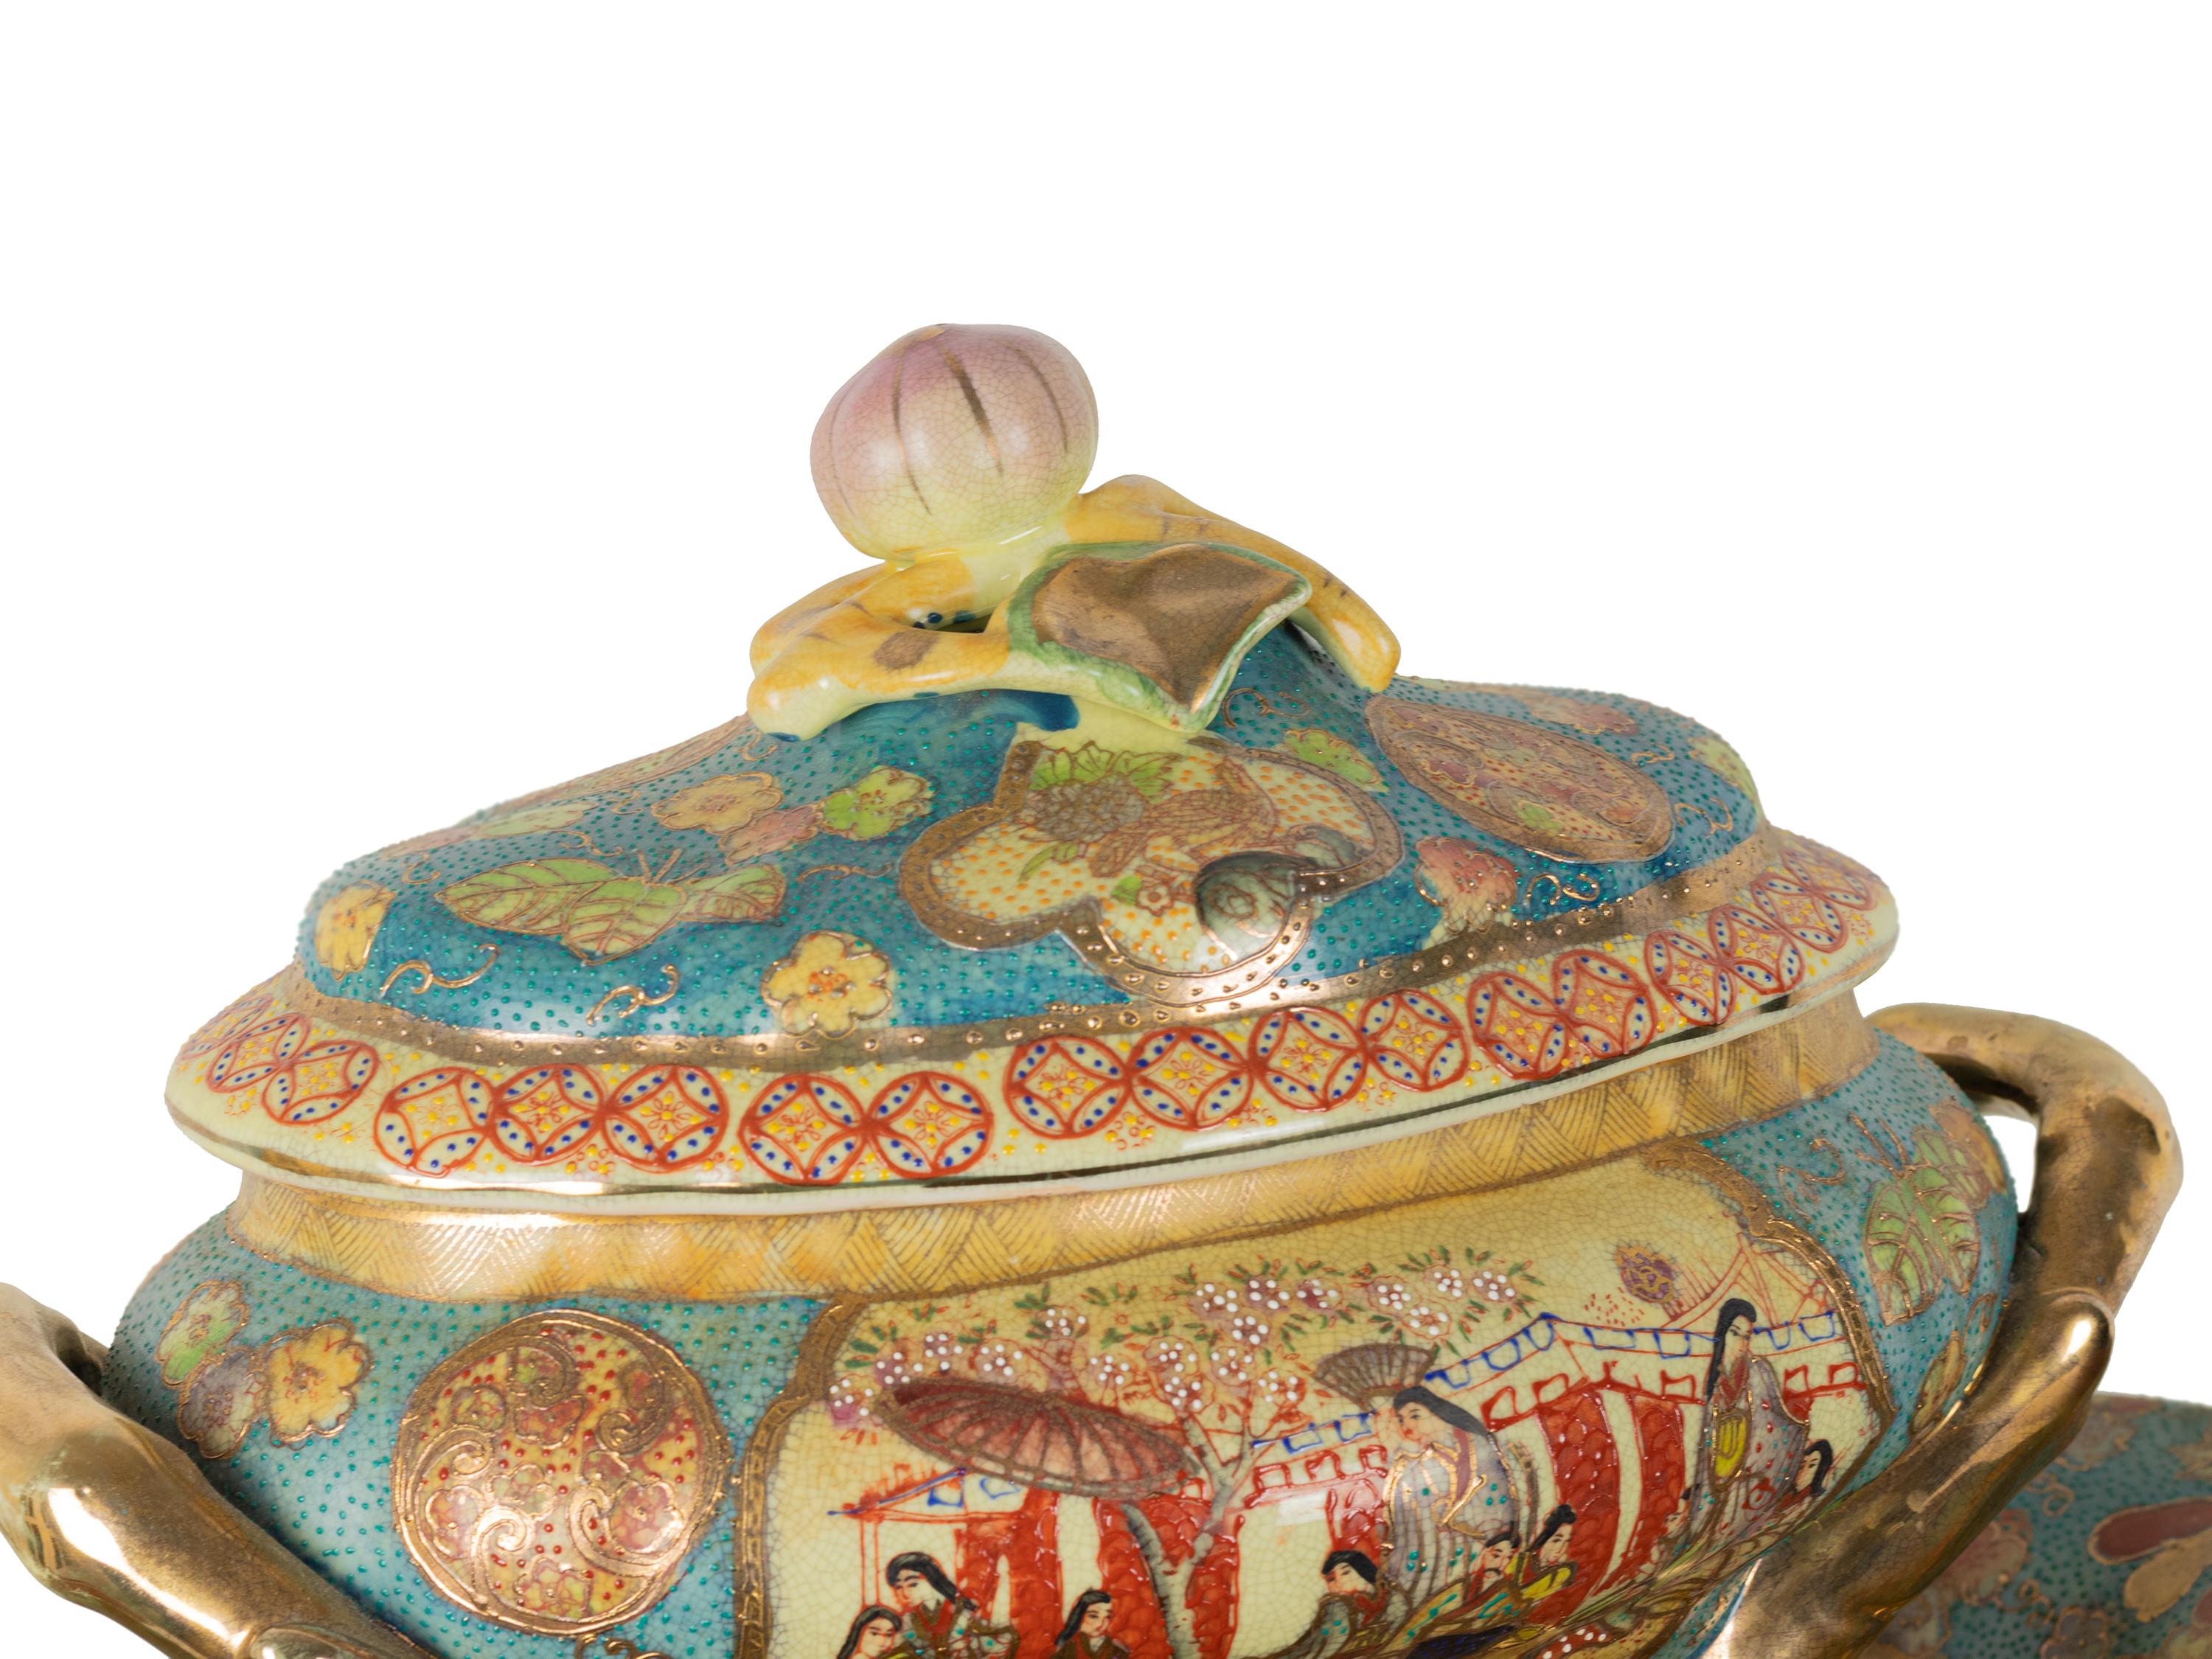 Asian porcelain soup tureen in the shape of an oval, richly polychromed design with enamel accents.The plate bears the China trademark, whereas the lids of Turesen 43 and 43 bear the S3 mark. The lid features embossed flower designs and profuse